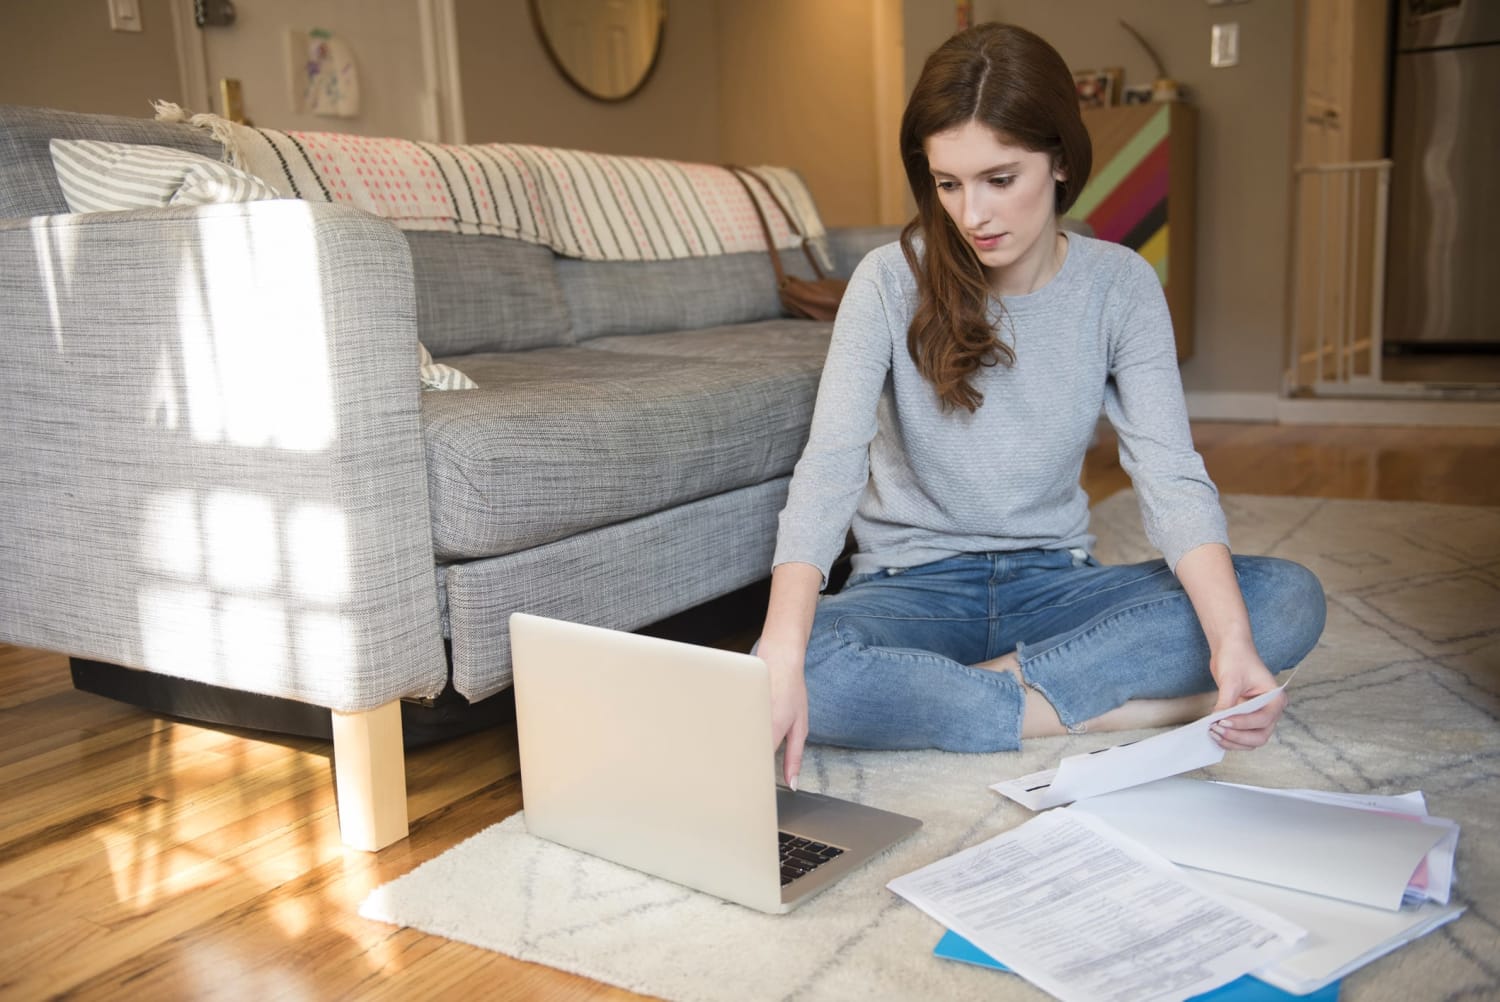 Mom and Dad foot some bills for 1 in 4 millennials working full time